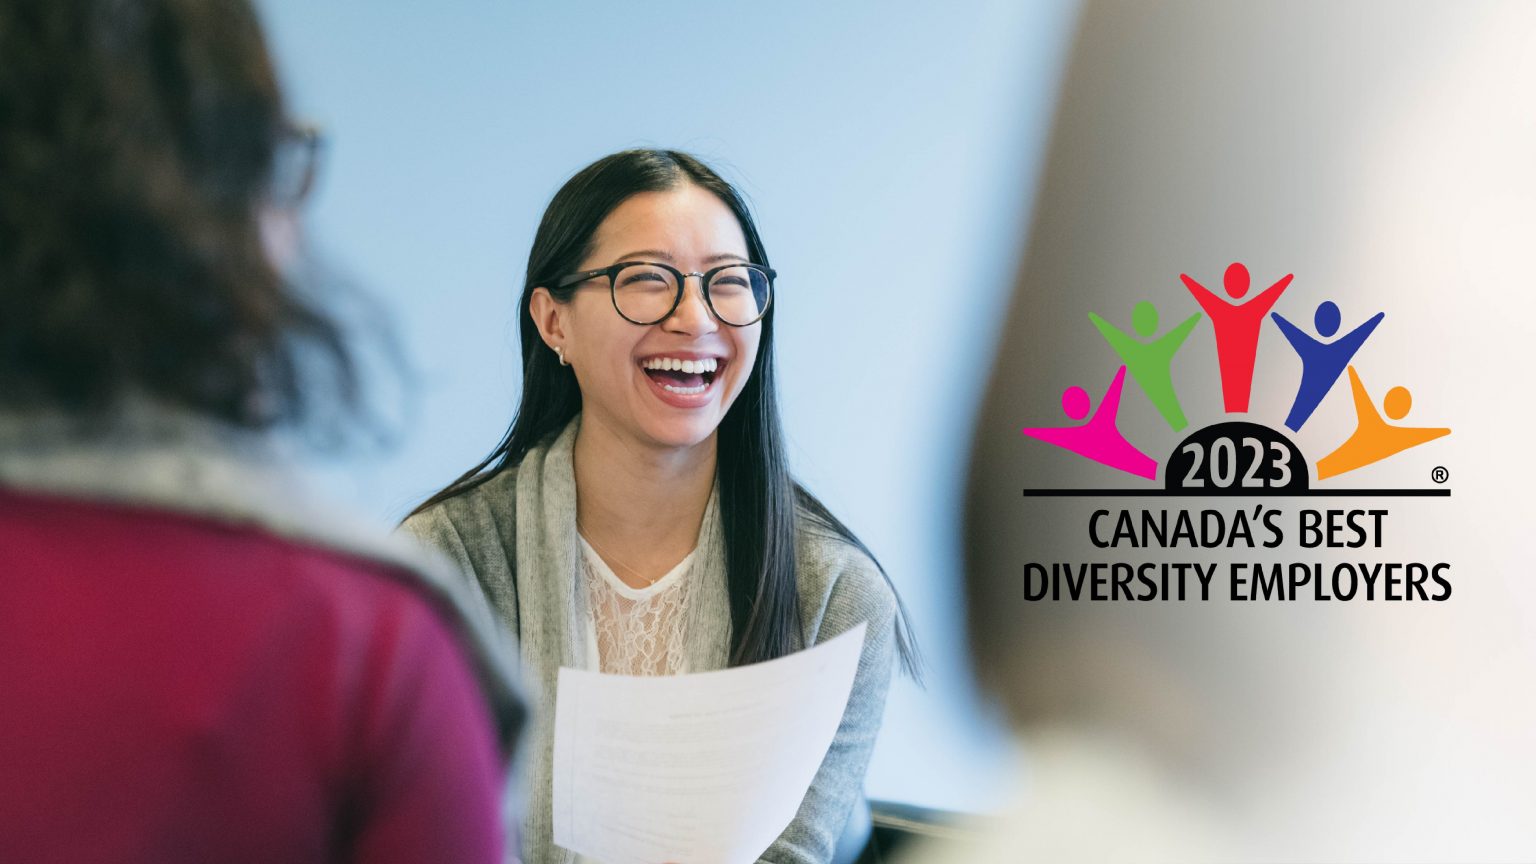 UBC recognized as one of Canada’s Best Diversity Employers in 2023